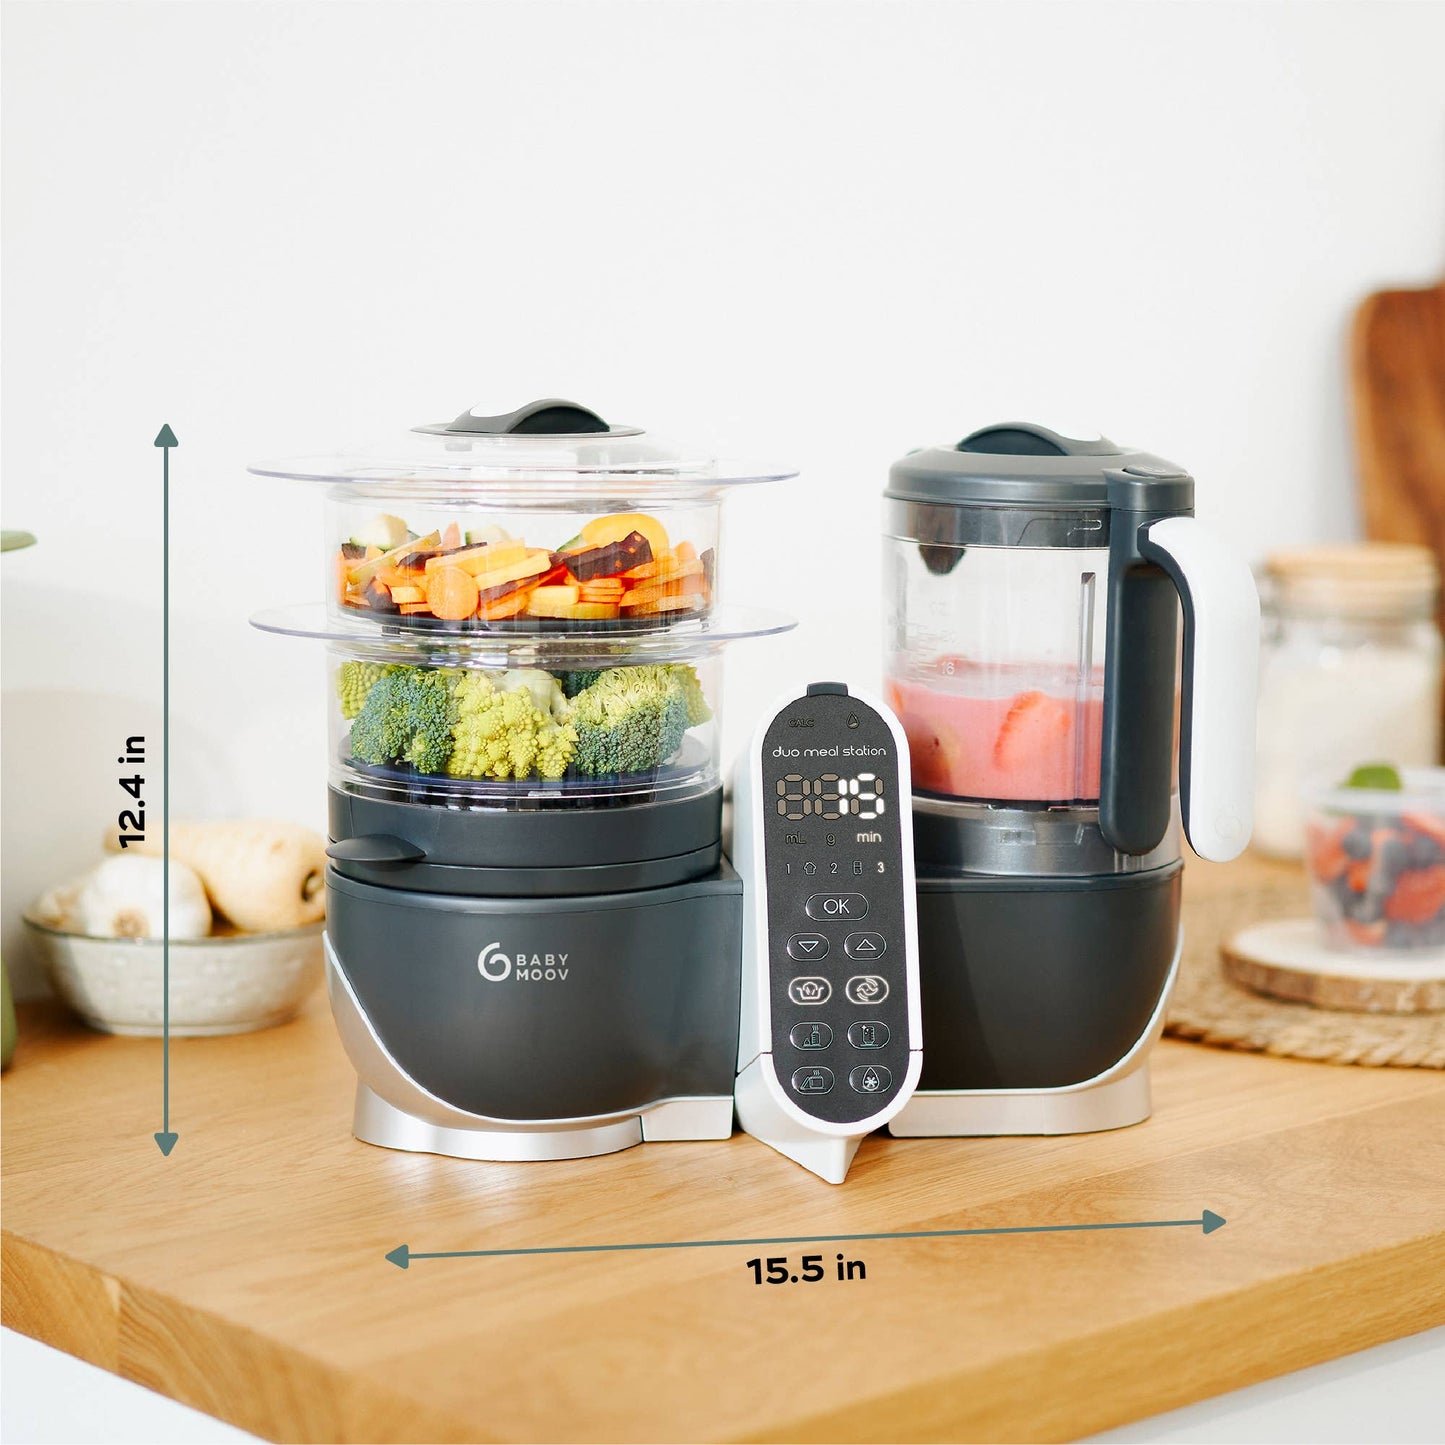 Duo Meal Station - Baby Food Processor